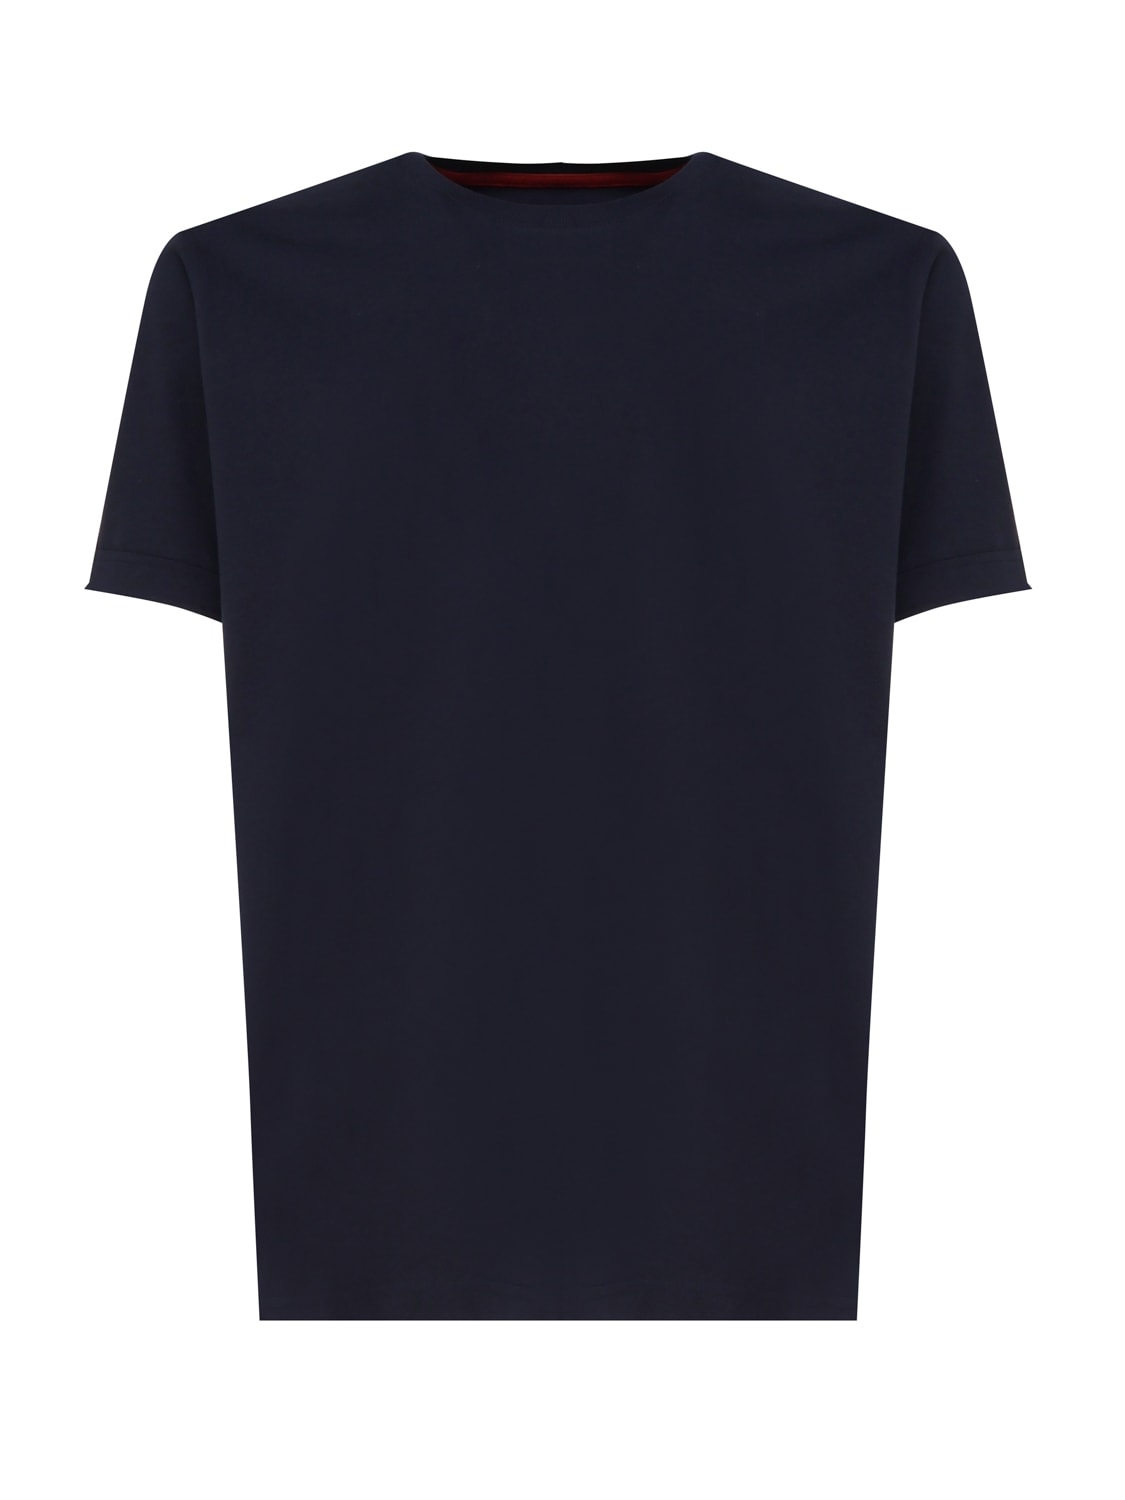 Cotton T-shirt With Contrasting Color Collar